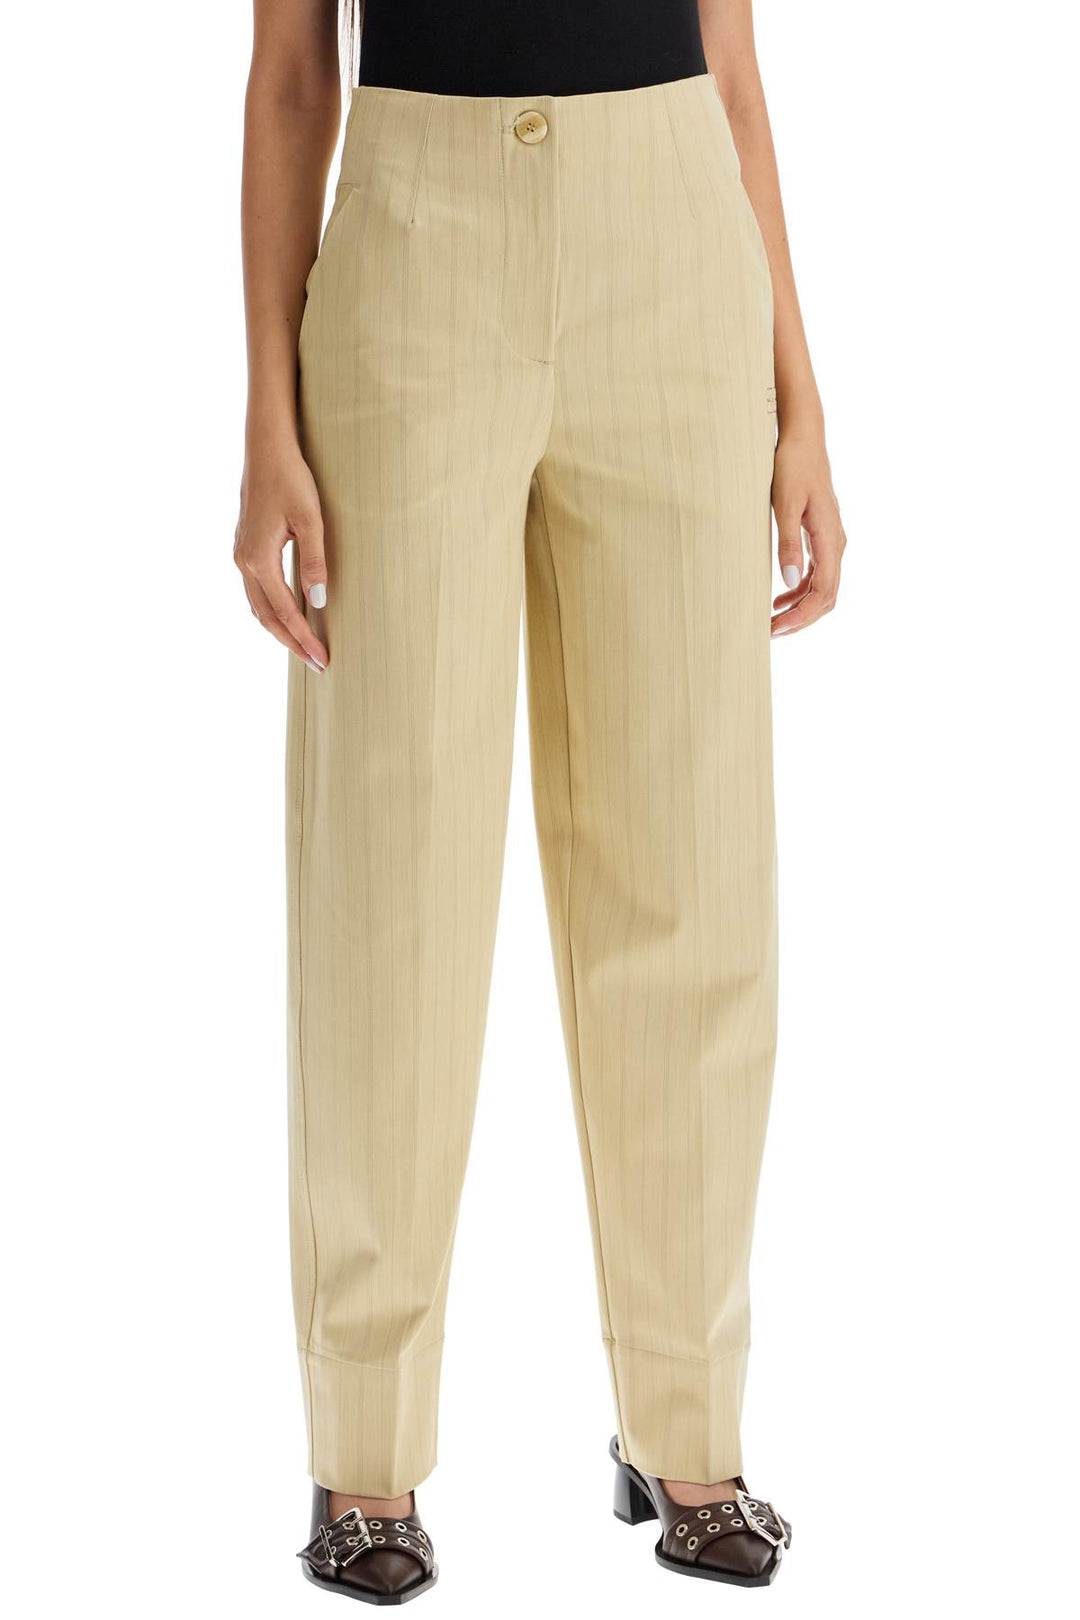 Ganni Striped Tapered Trousers   Beige